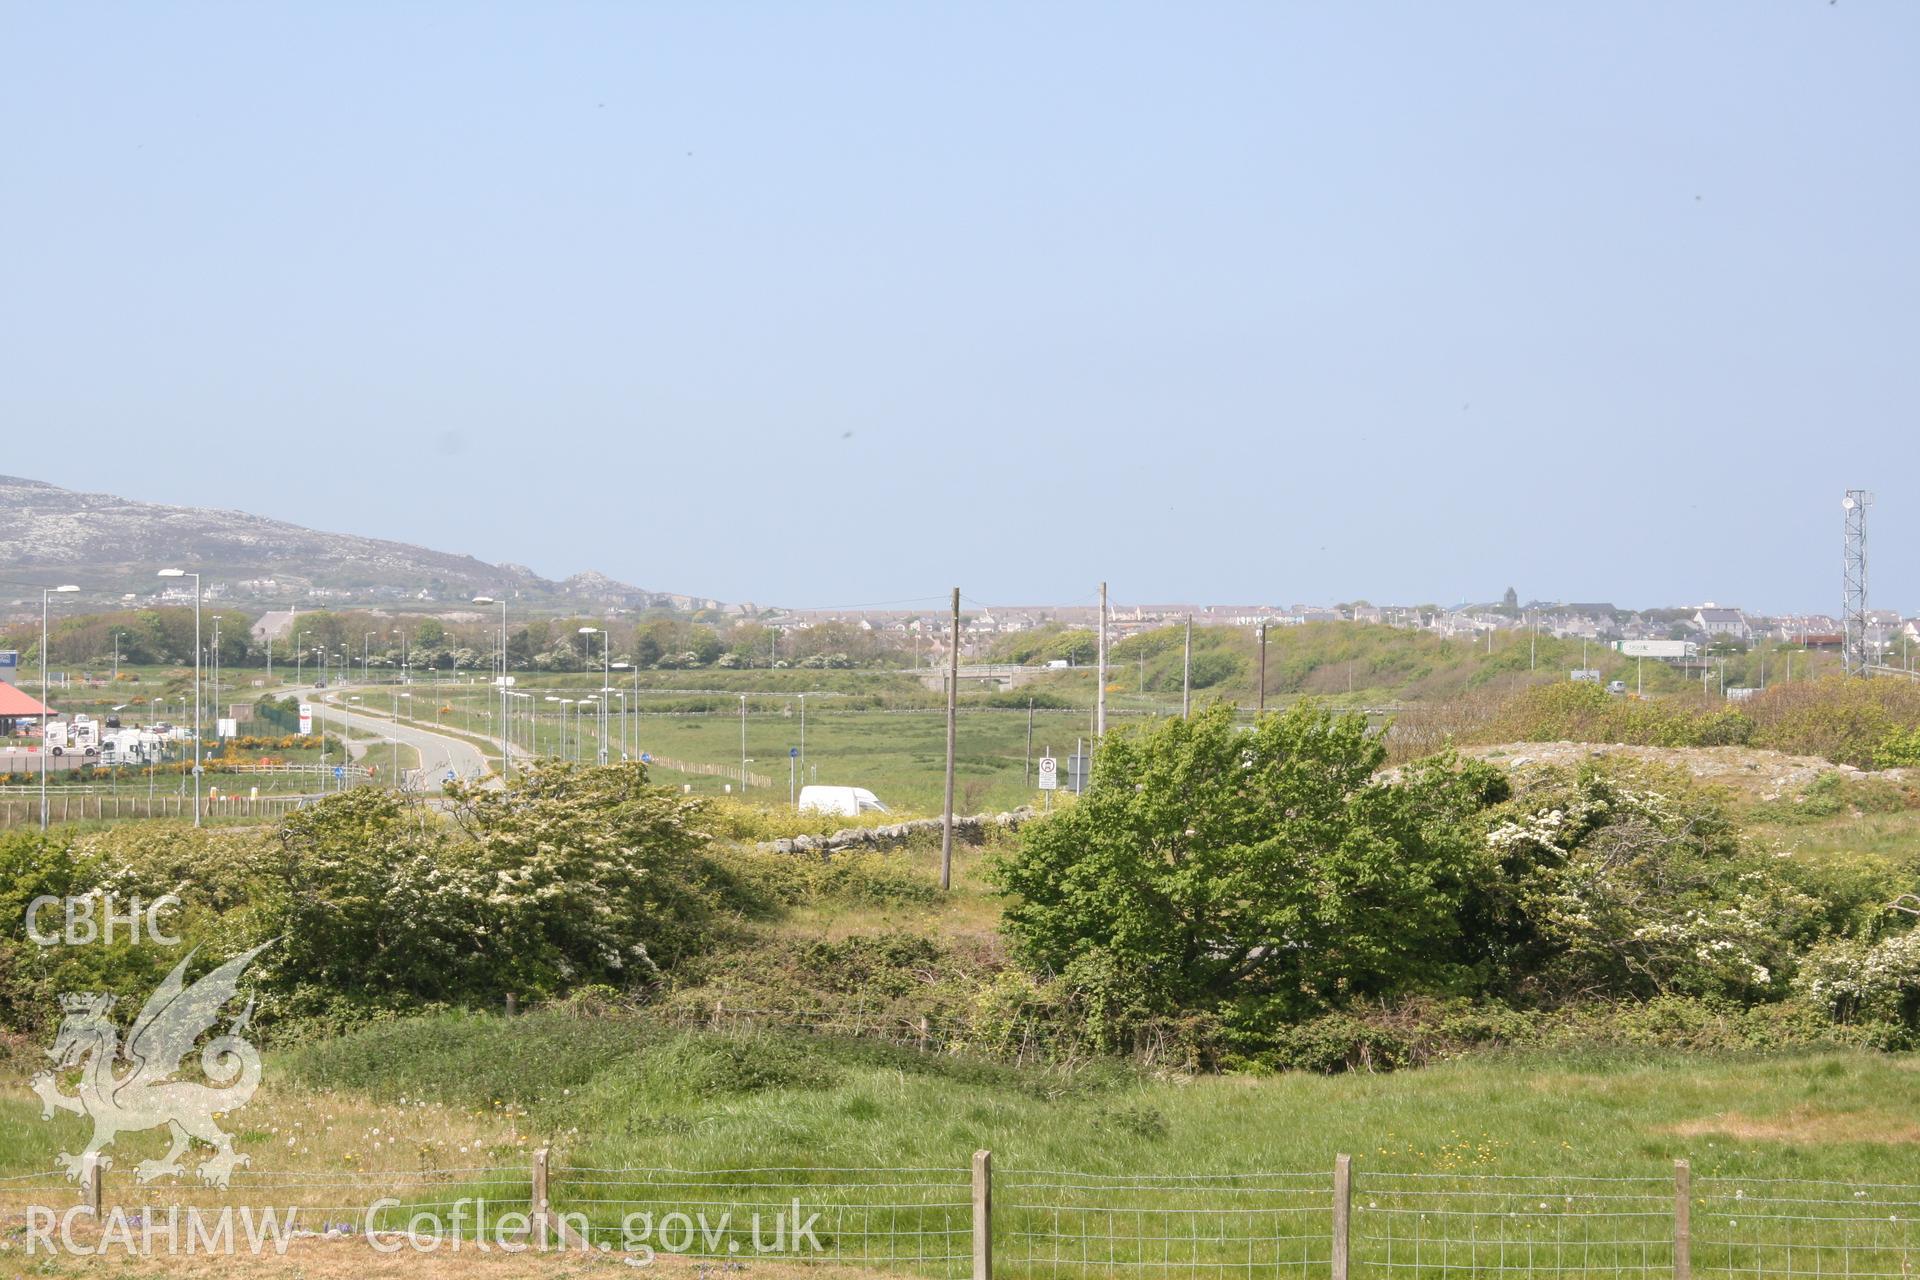 Shot, using slight camera zoom, towards Ty-Mawr Standing Stone & the development site. Looking northwest. Digital photograph taken for archaeological work at Parc Cybi Enterprise Zone, Holyhead, carried out by Archaeology Wales, 2017. Project no: P2522.